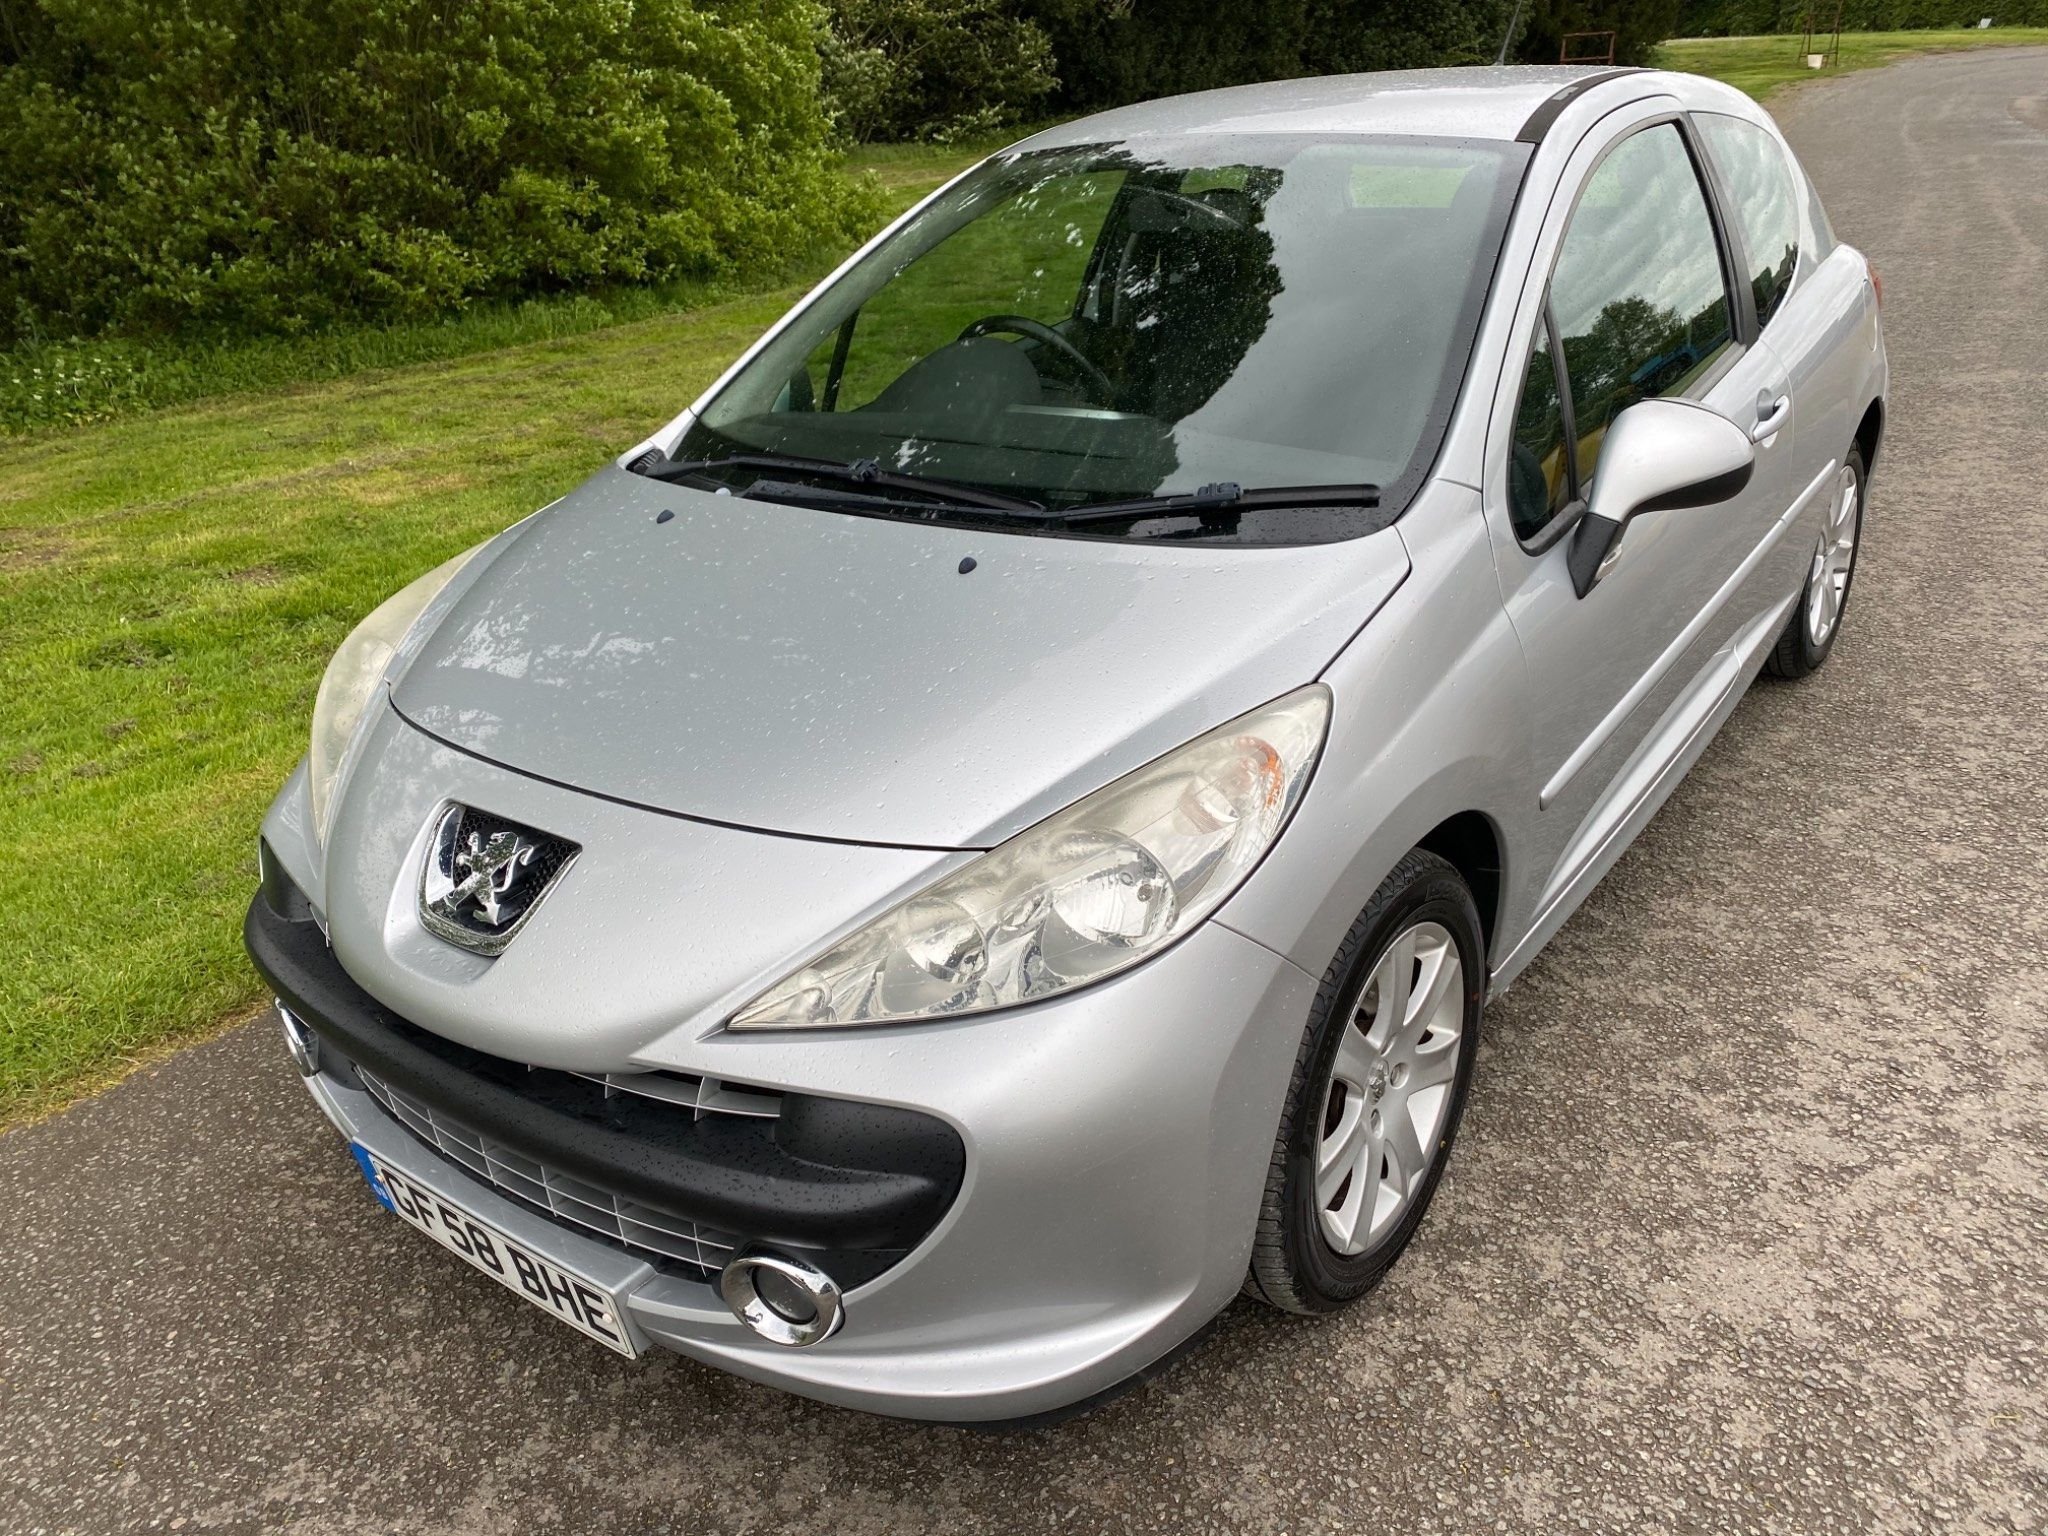 Used Peugeot 207 Hatchback 1.6 Hdi Sport 5dr in Wakefield